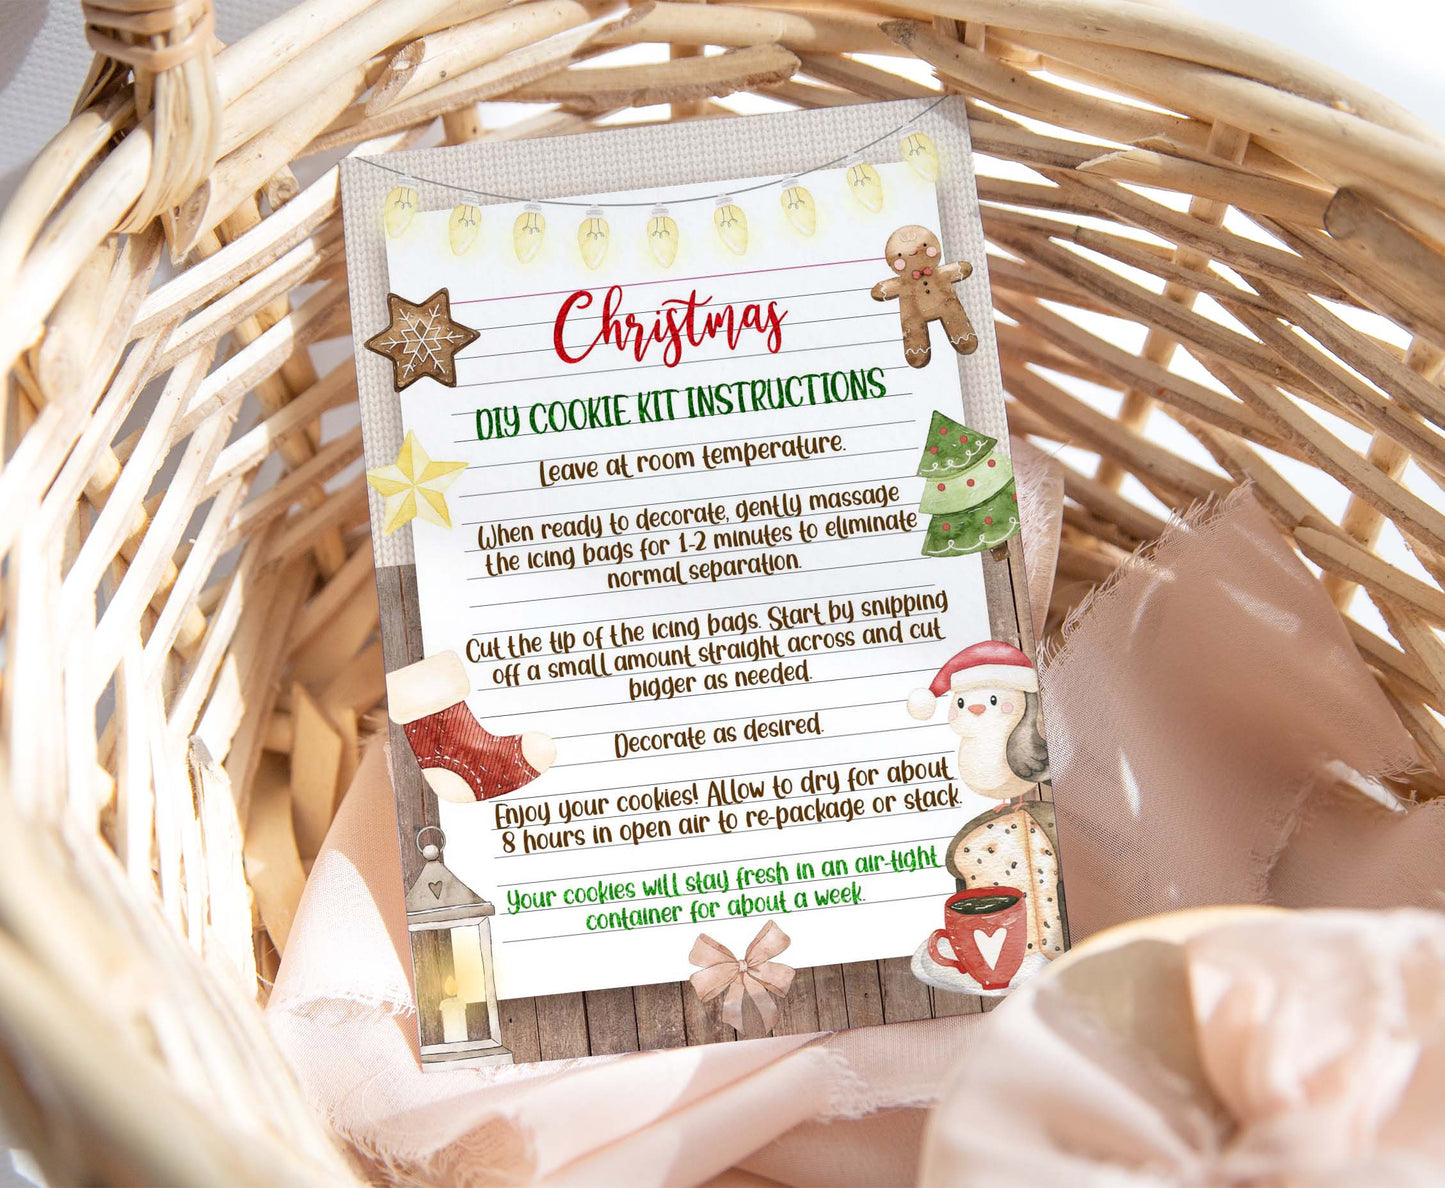 Diy Cookie Kit Instructions Card | Merry Christmas Printable Cards - 112